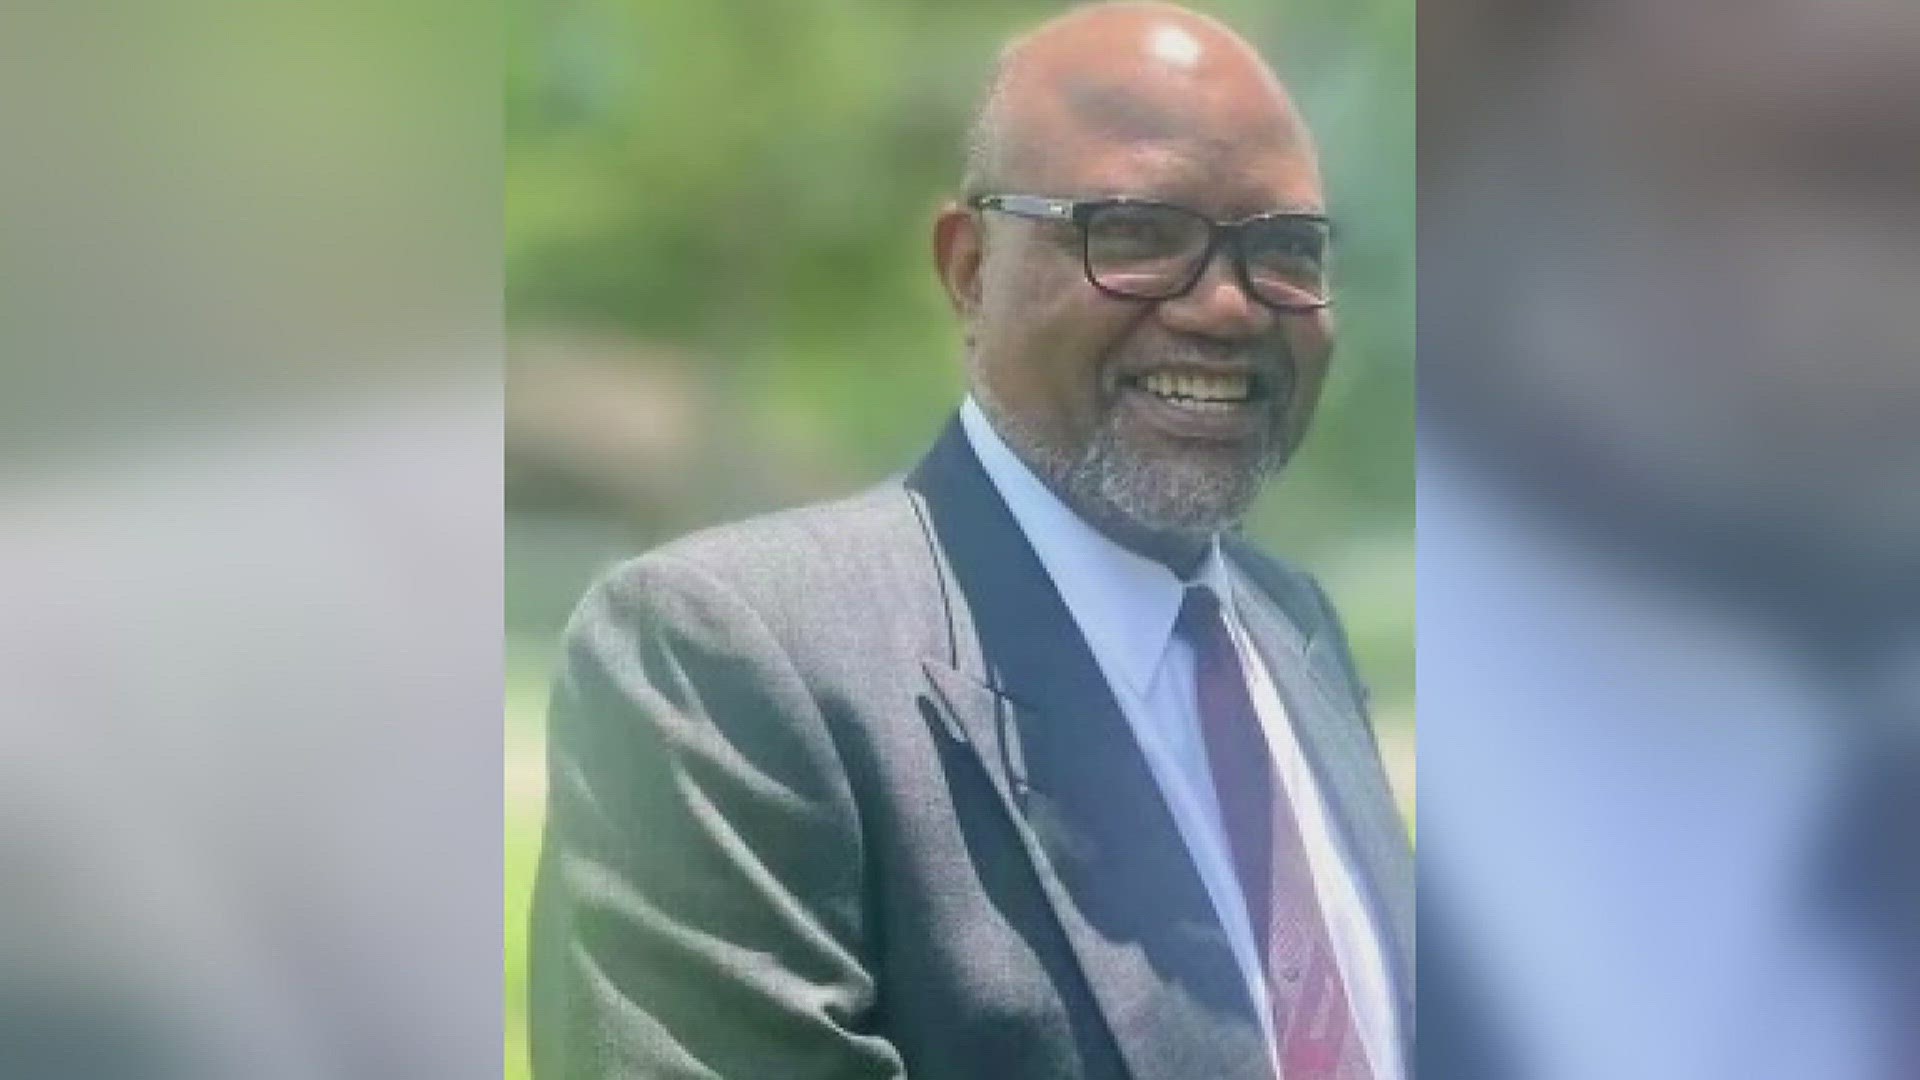 Dr. Hervy Hiner has been a pillar in the Southeast Texas community, his family will lay him to rest at the age of 69 after battling pancreatic cancer.